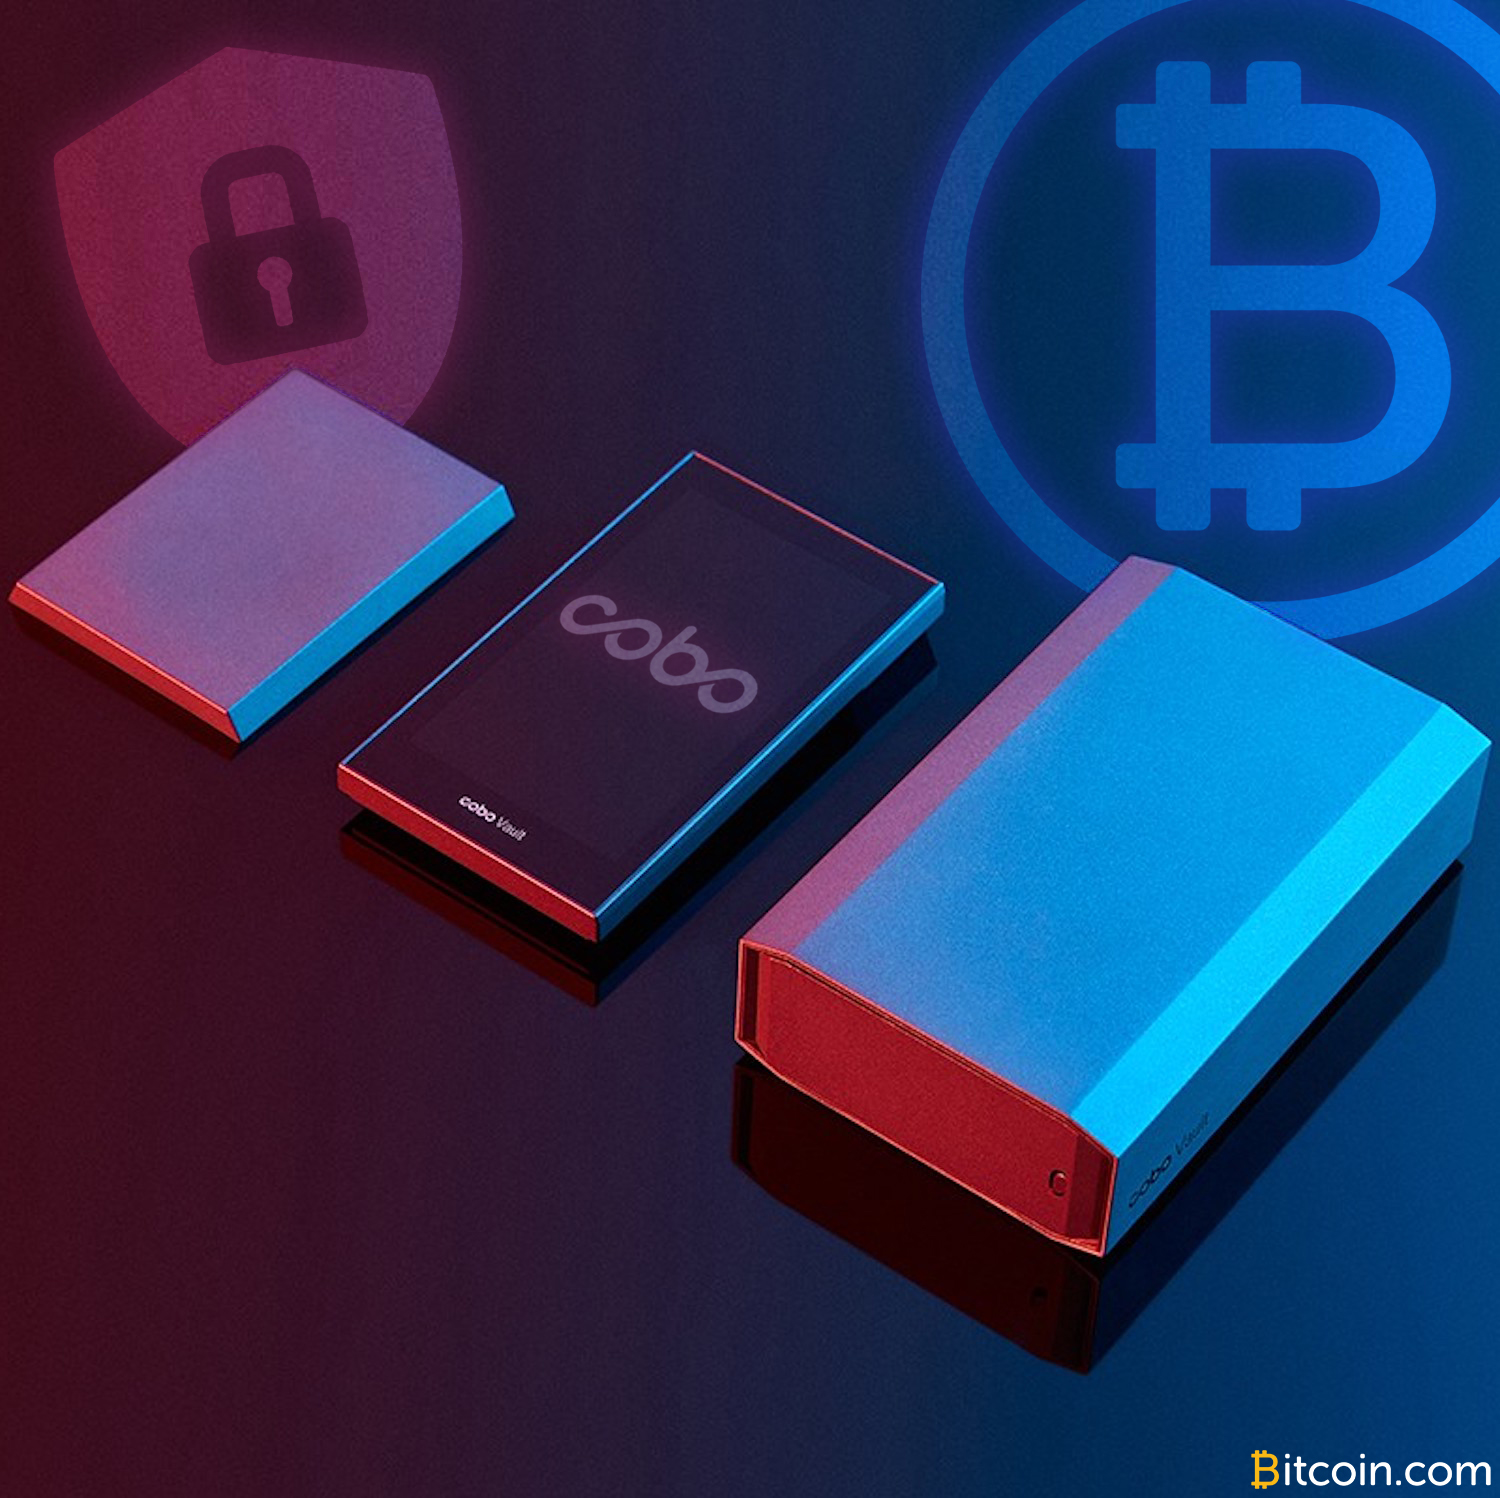 The Cobo Vault Hardware Wallet Will Outlive You